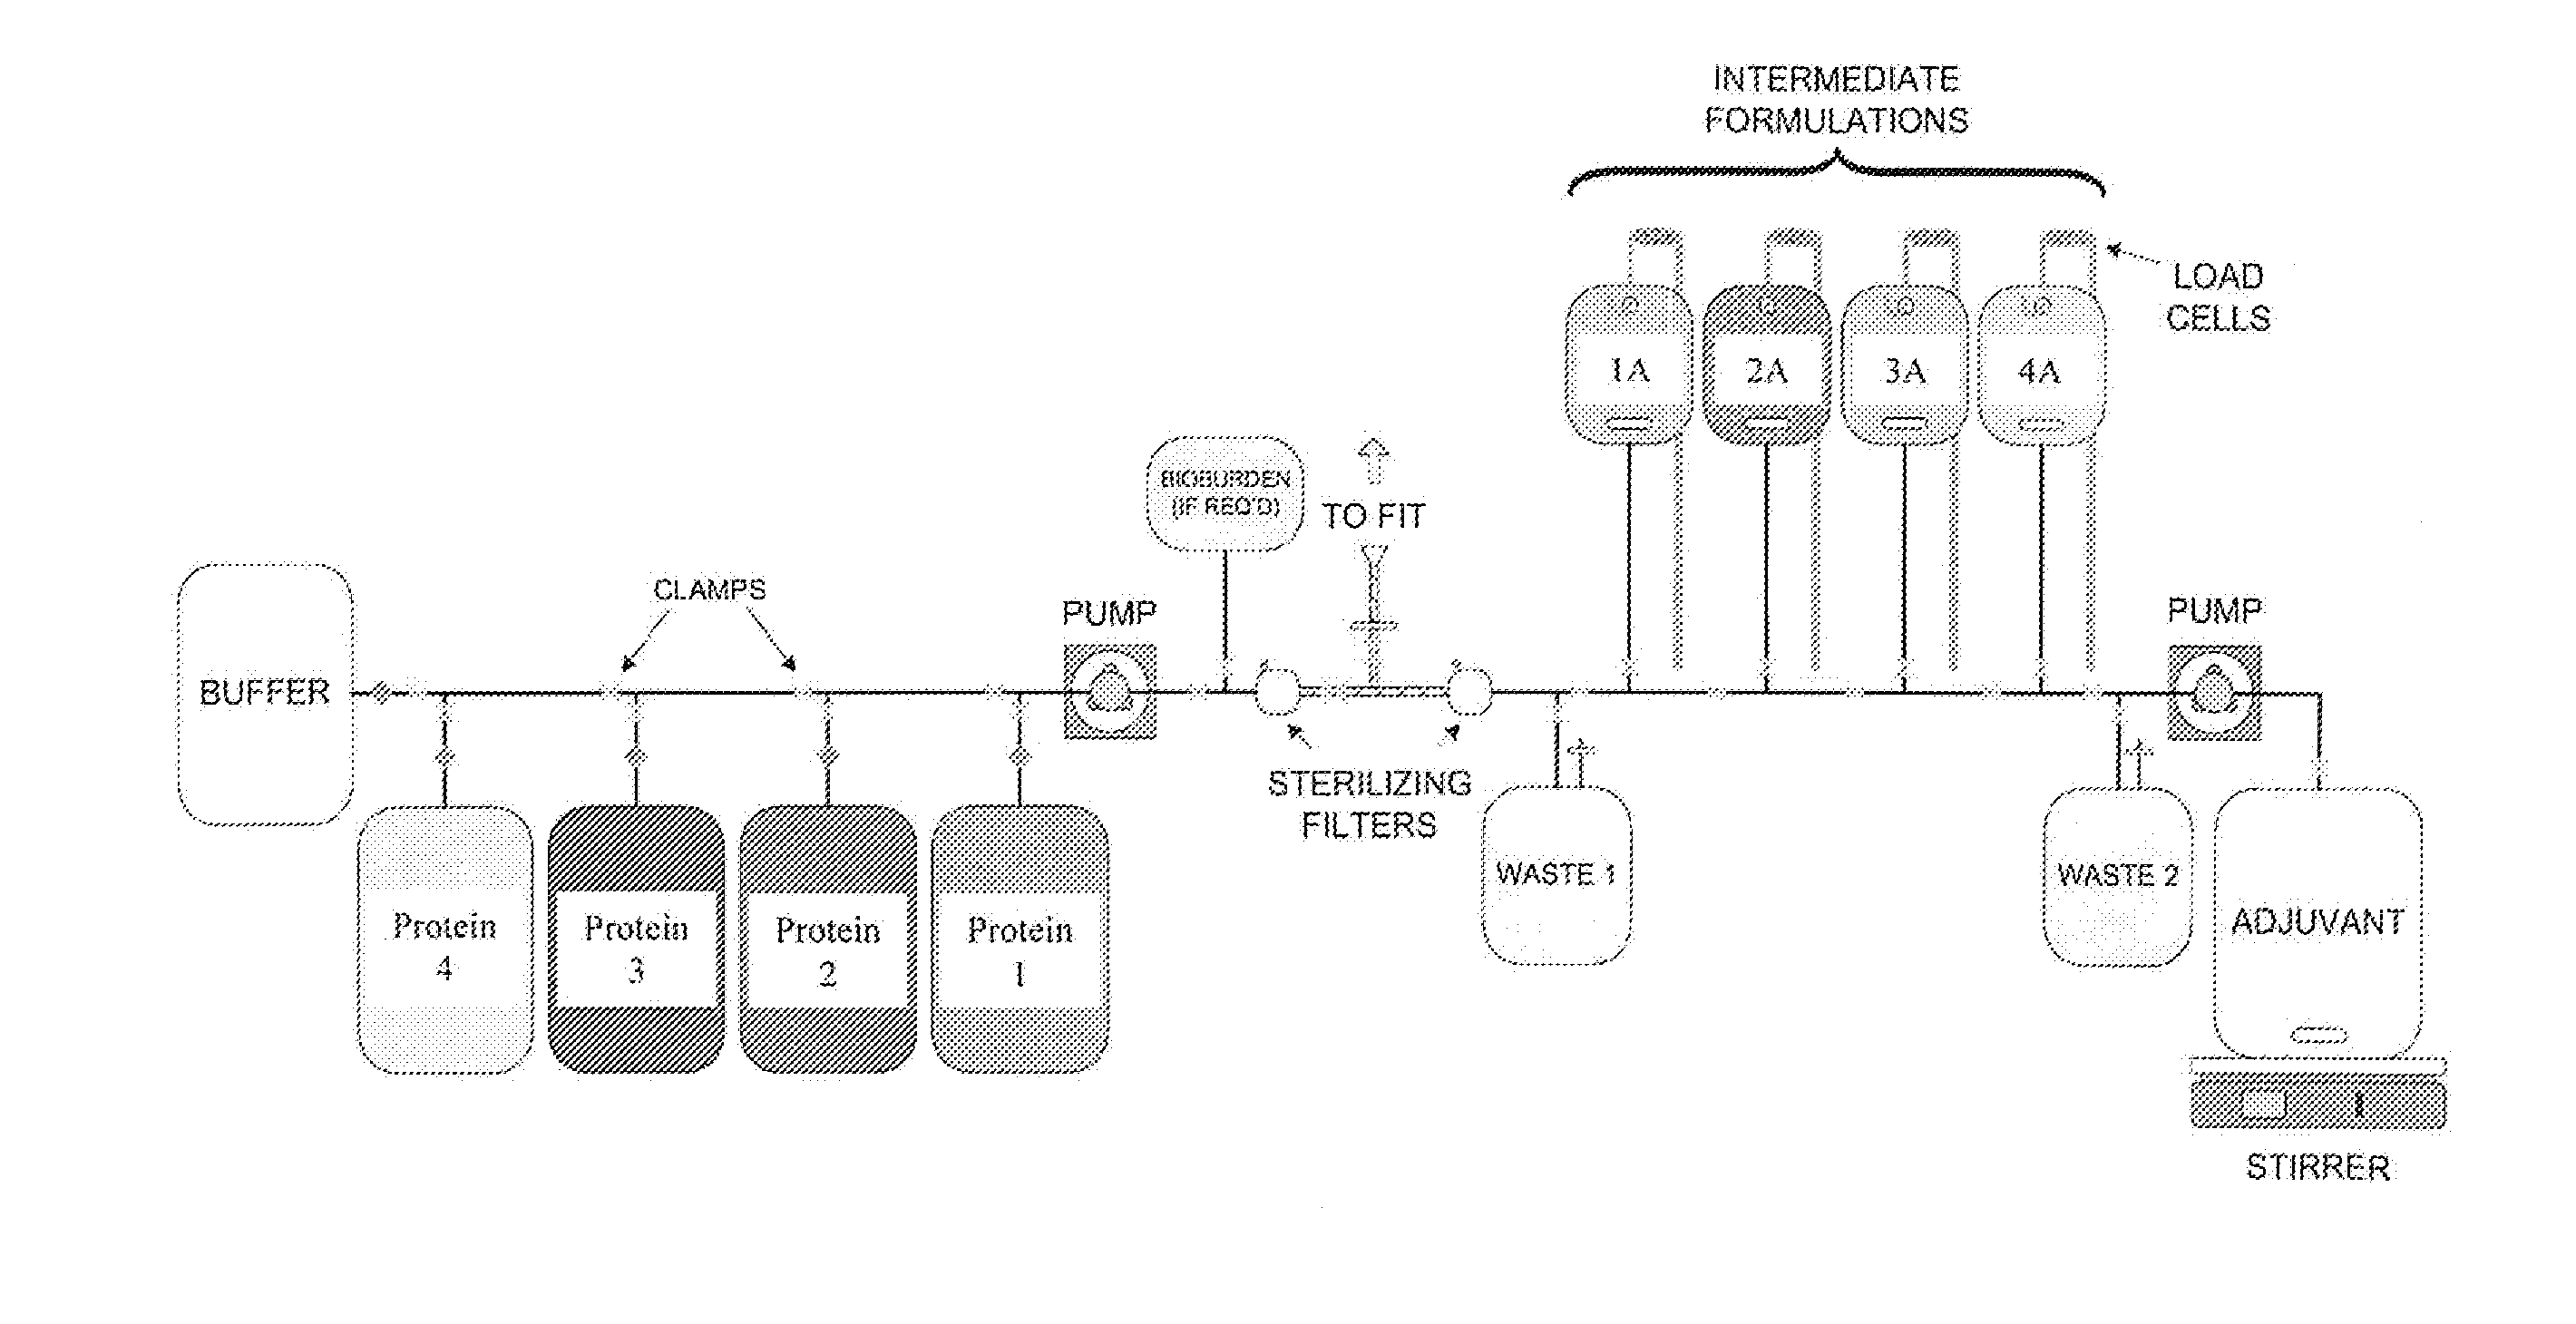 System and Process for Producing Mulit-Component Biopharmaceuticals